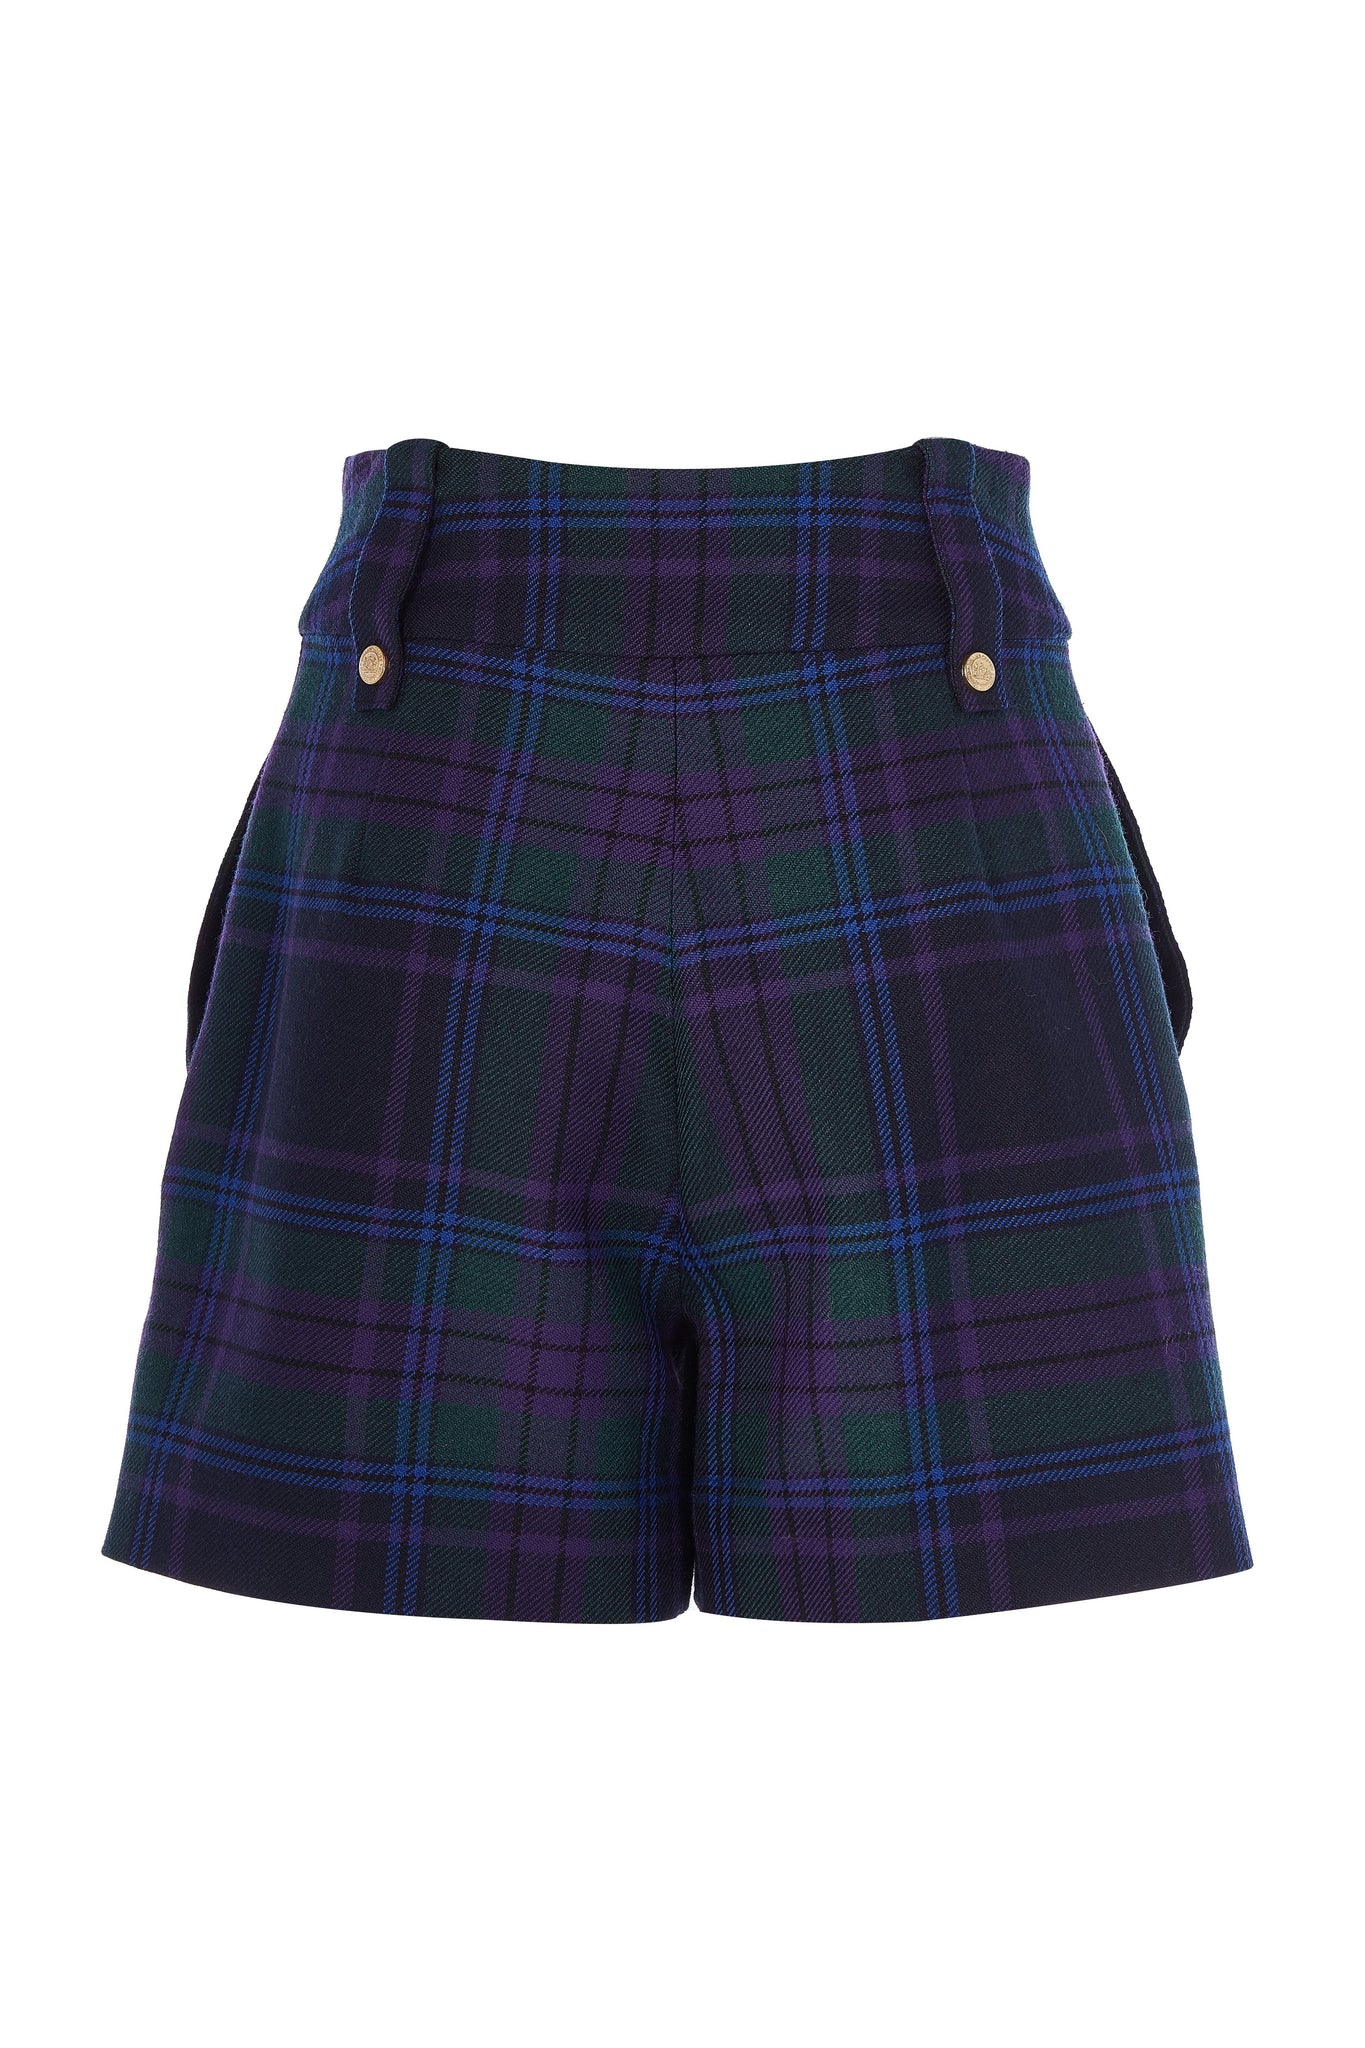 back of womens blue green and purple tartan high rise tailored shorts with two single knife pleats and centre front zip fly fastening with twin branded gold stud buttons and side hip pockets with branded rivet detailing at top and bottom of pockets